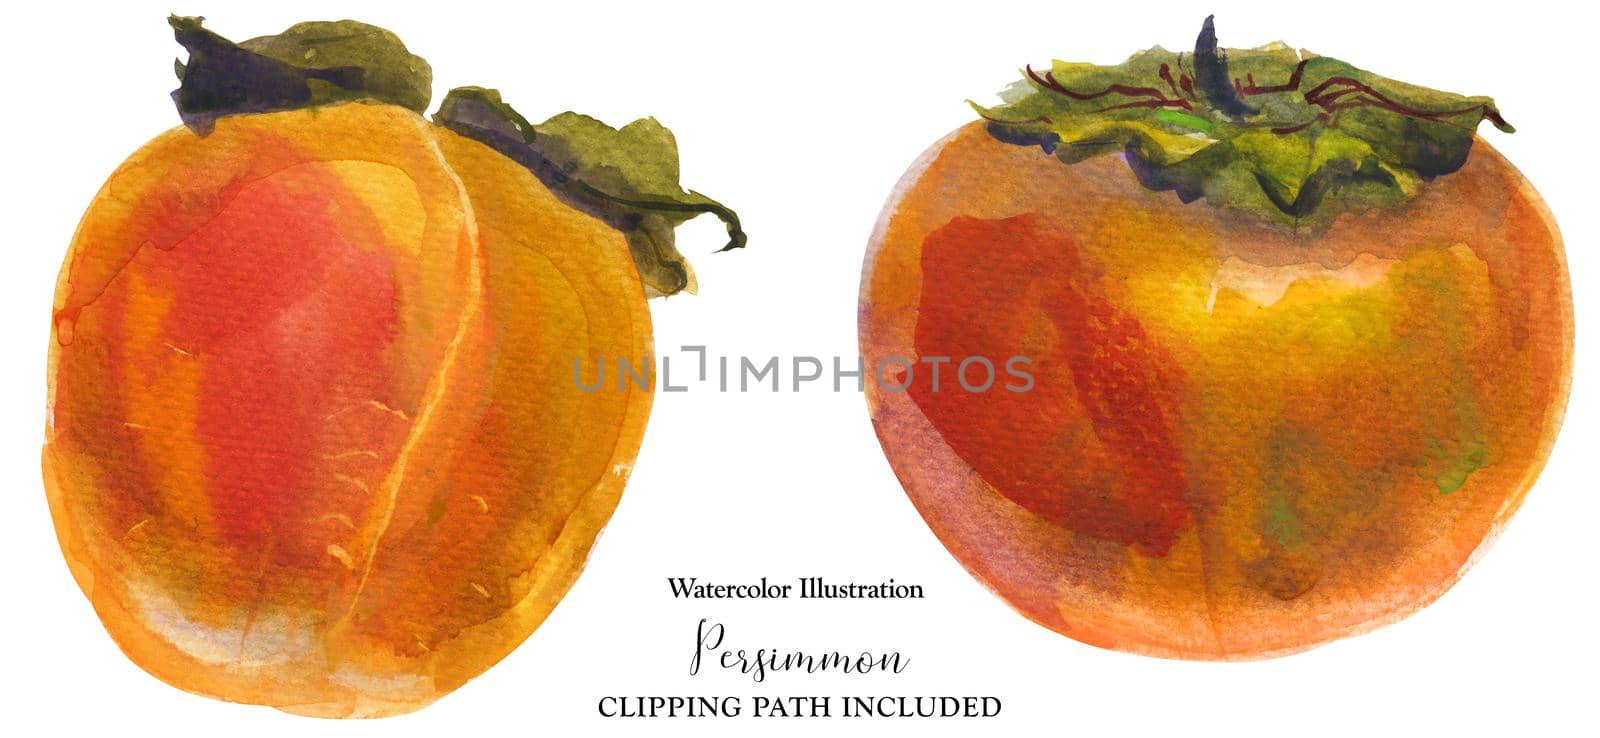 Winter orange persimmon fruits on a white background, watercolor with clipping path